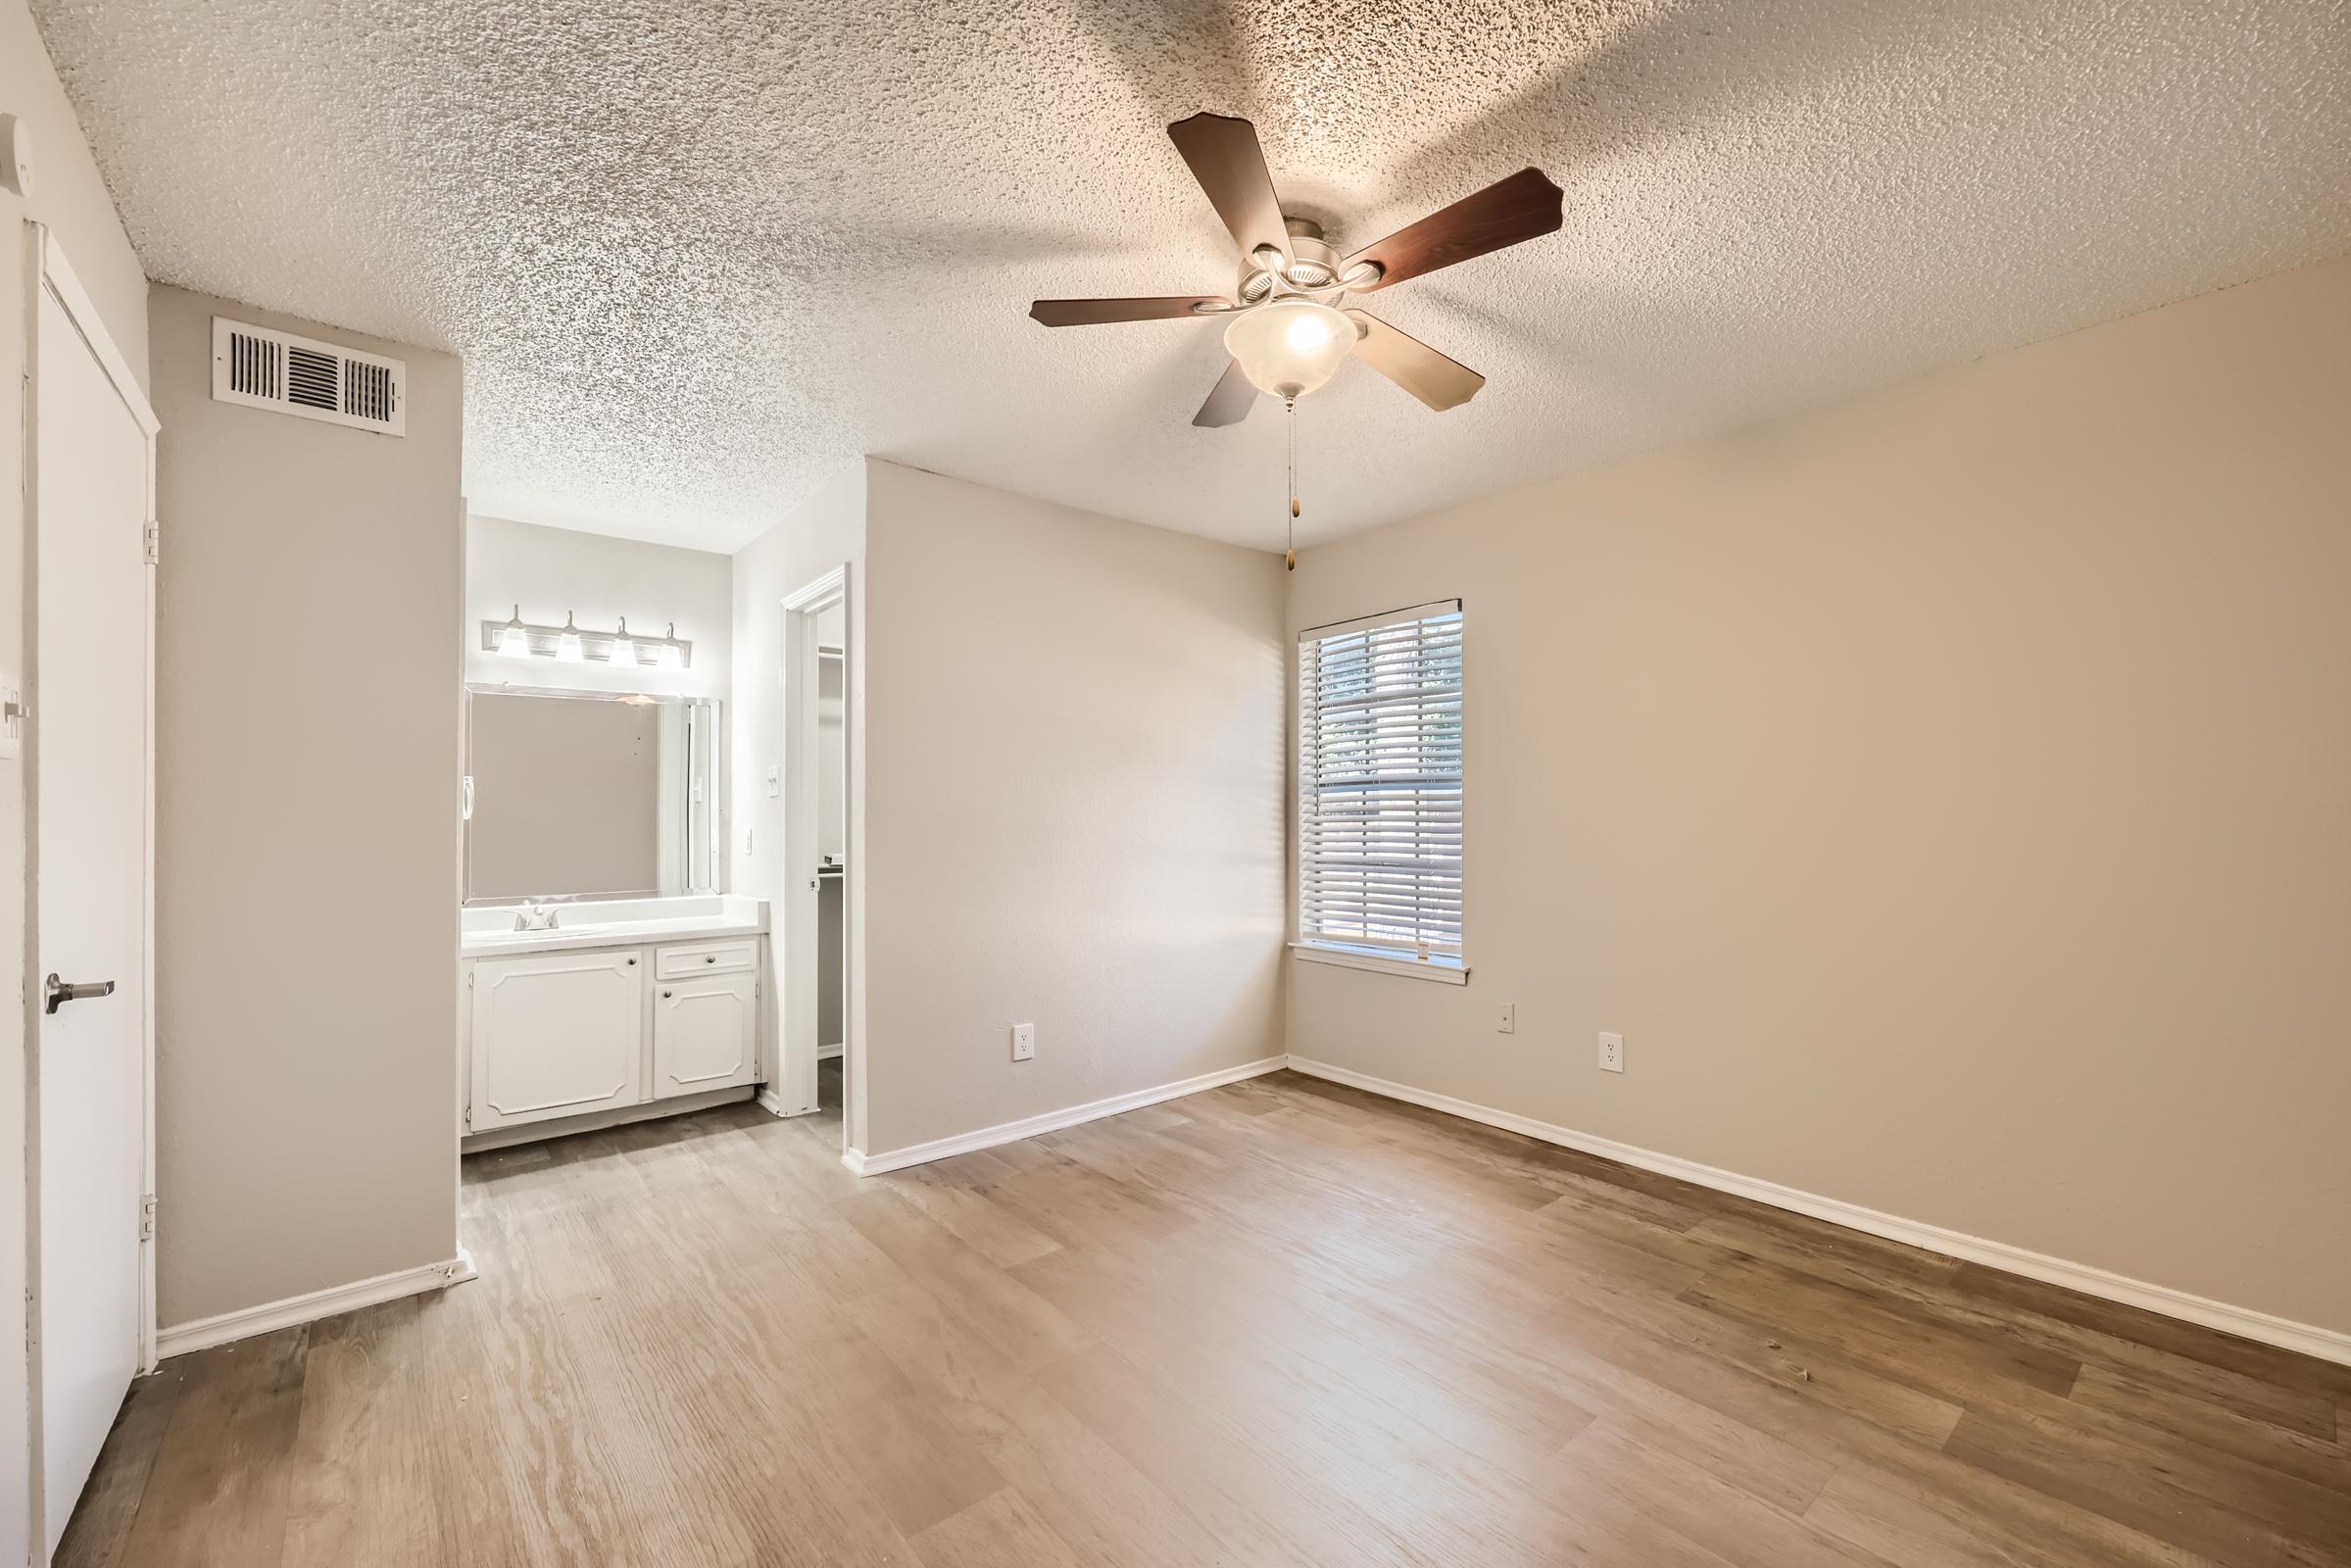 A large bedroom with an en-suite bathroom and separate vanity area at Rise Oak Creek.